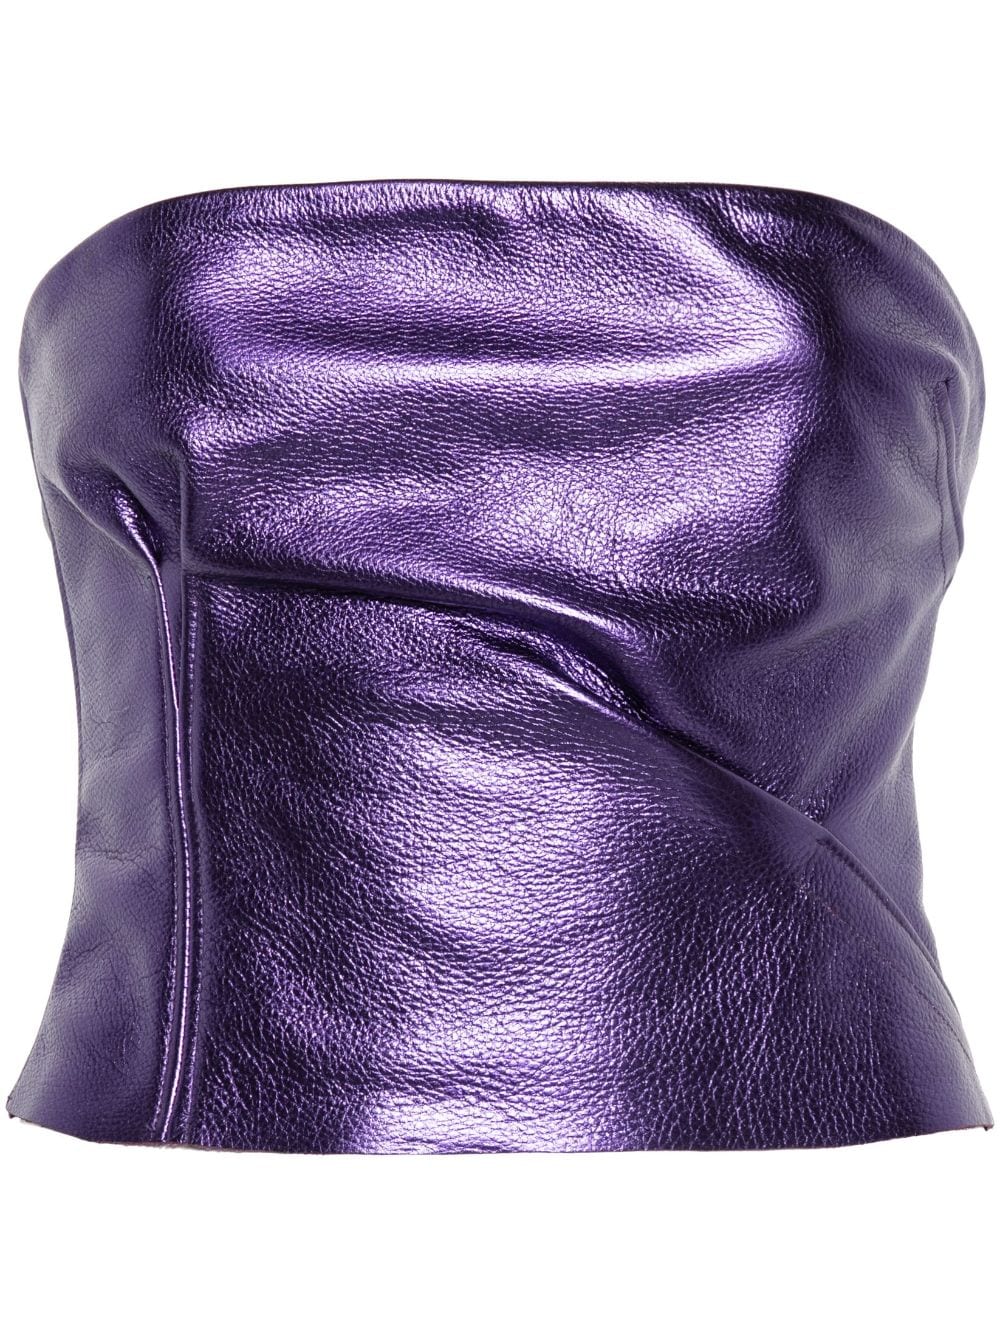 bustier-style leather top